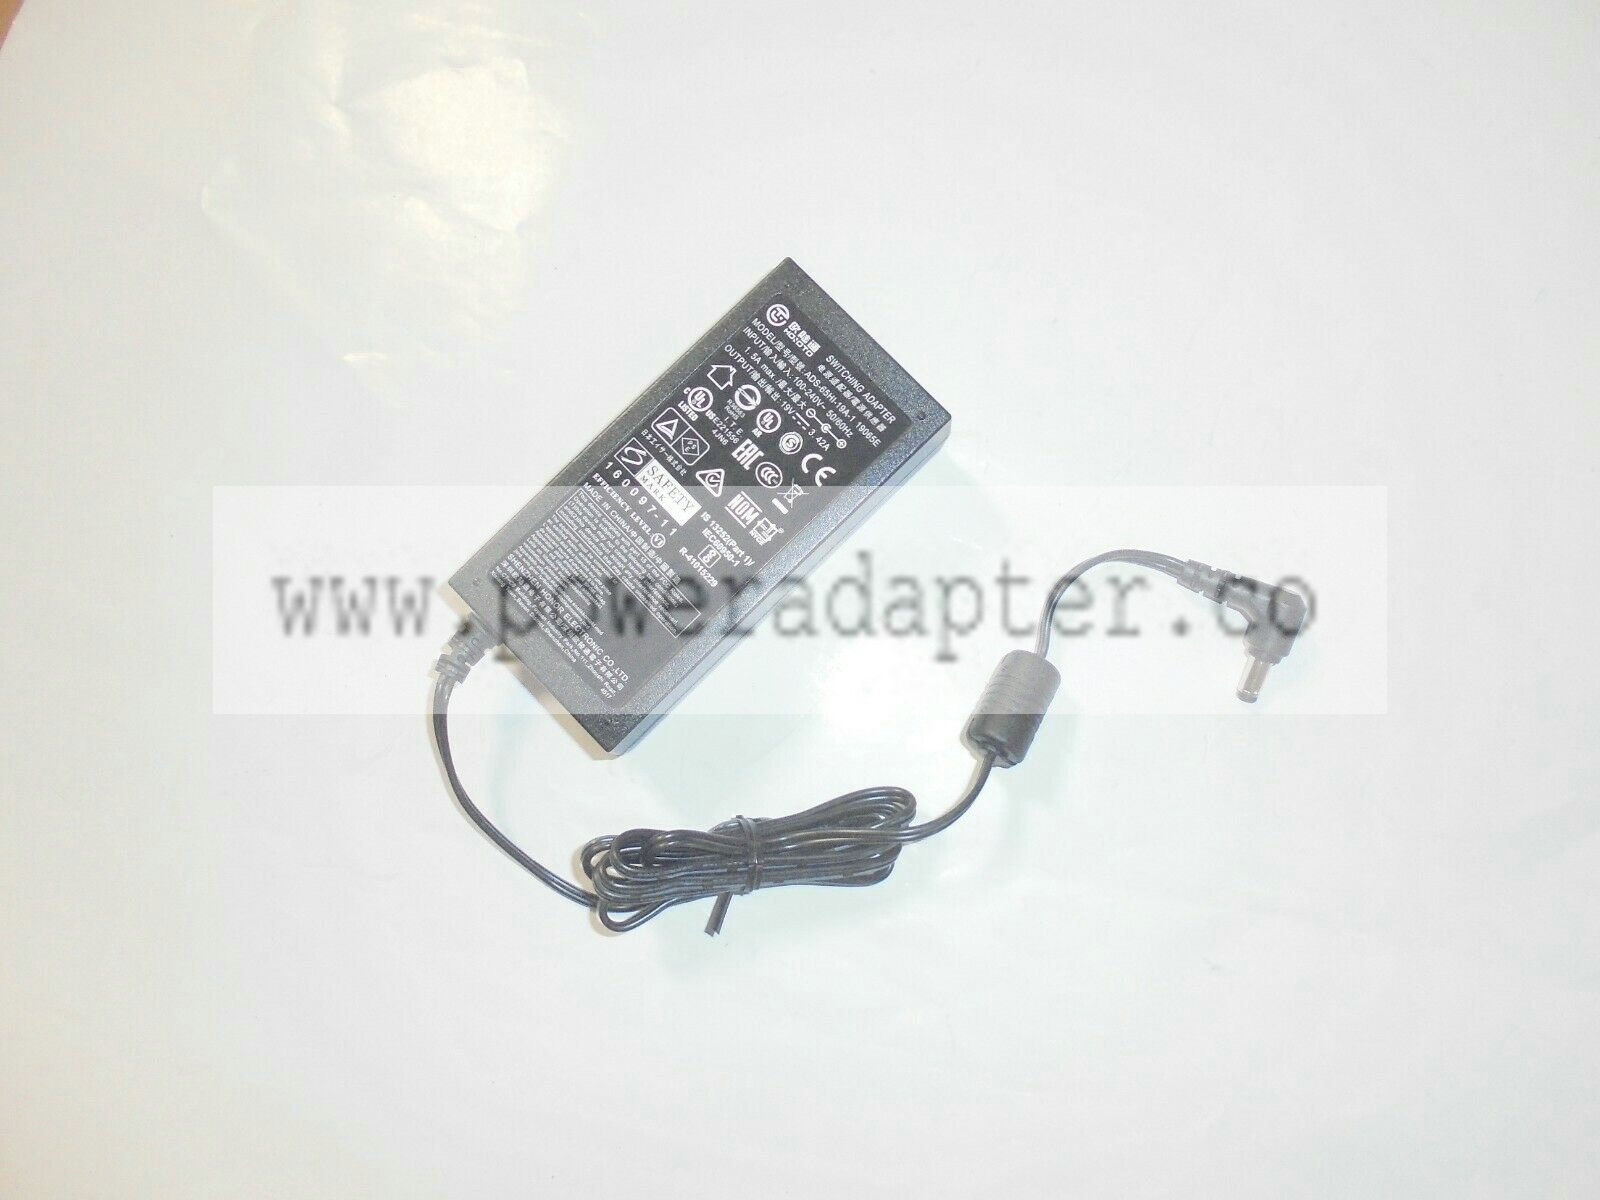 LaCie HOIOTO Switching Adapter Model ADS-65HI-12N-2 12060E Power Supply New Max. Output Power: 65 W Brand: Acer Out